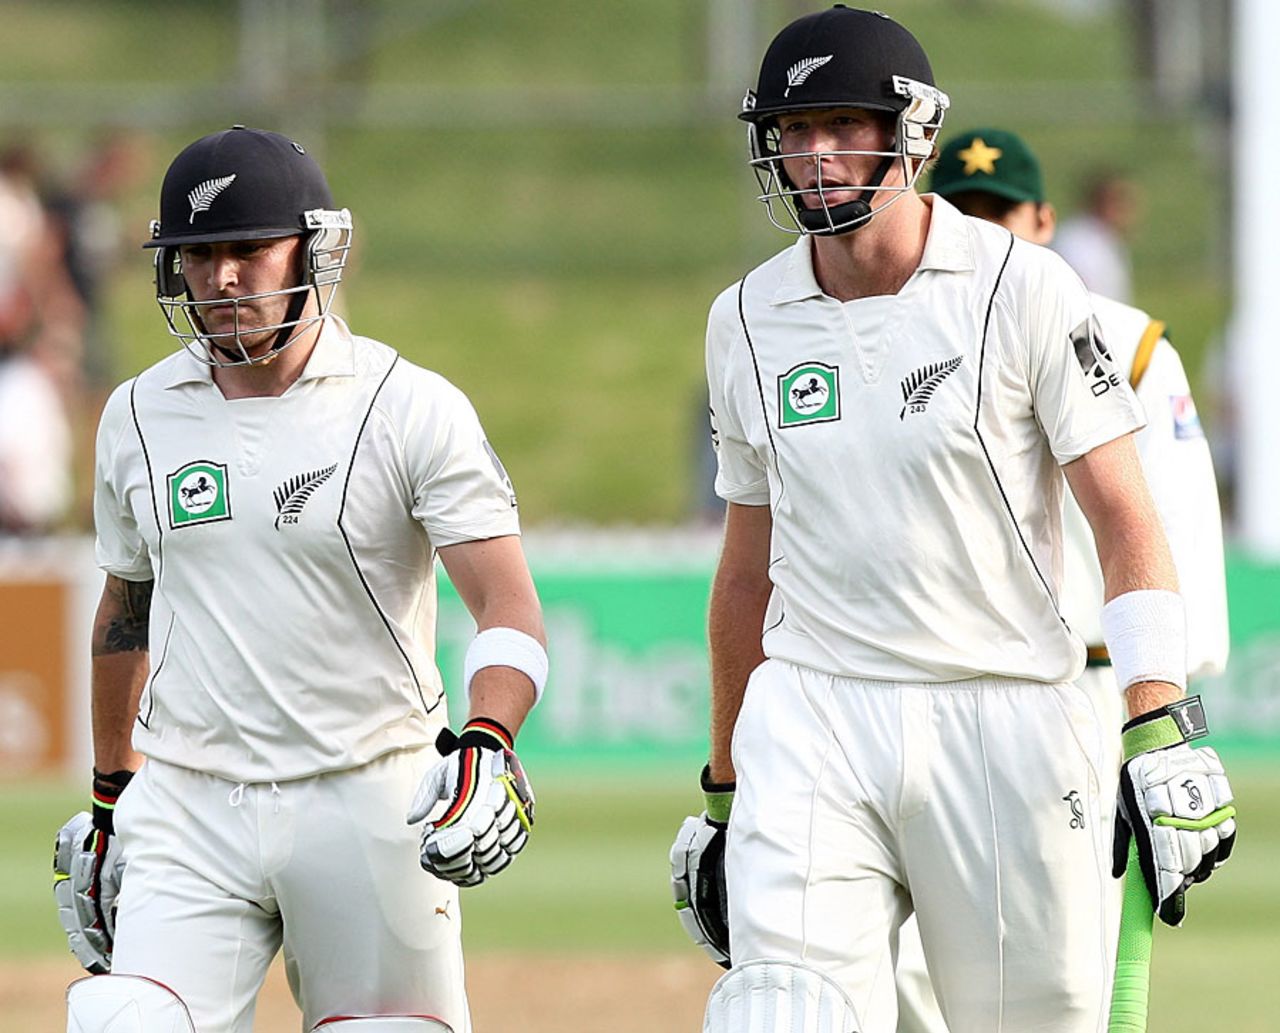 Brendon McCullum and Martin Guptill carried New Zealand safely through to stumps, New Zealand v Pakistan, 2nd Test, Wellington, 3rd day, January 17, 2011